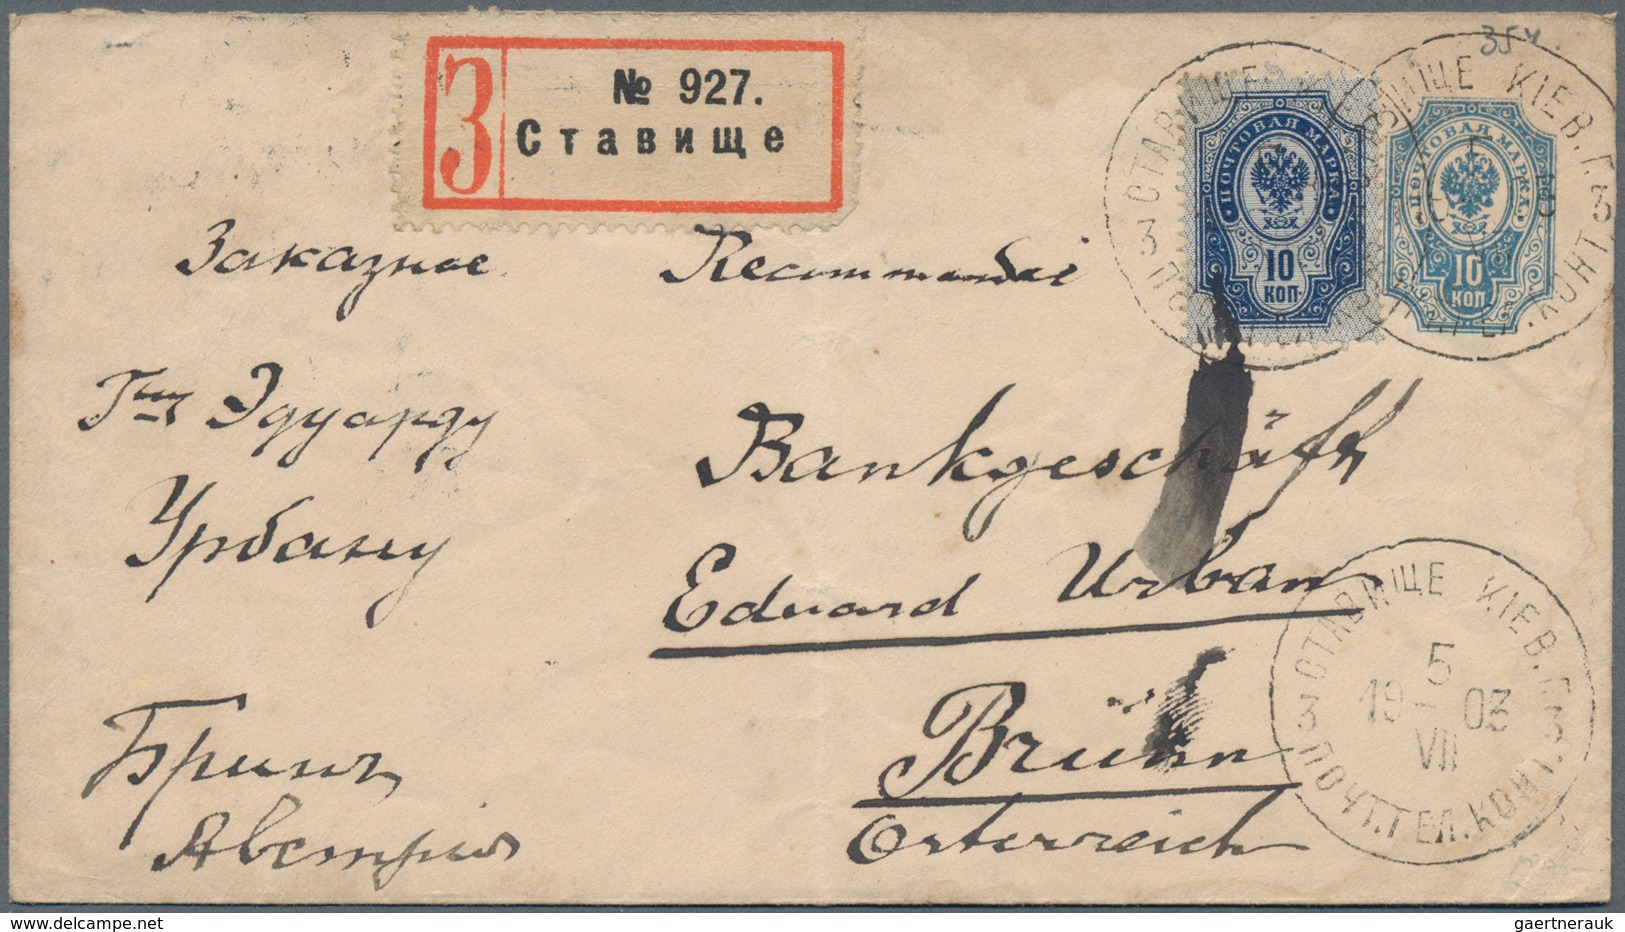 Russland: 1841/1922, covers and stationery inc. prephilately (27, all to France with Prussia transit